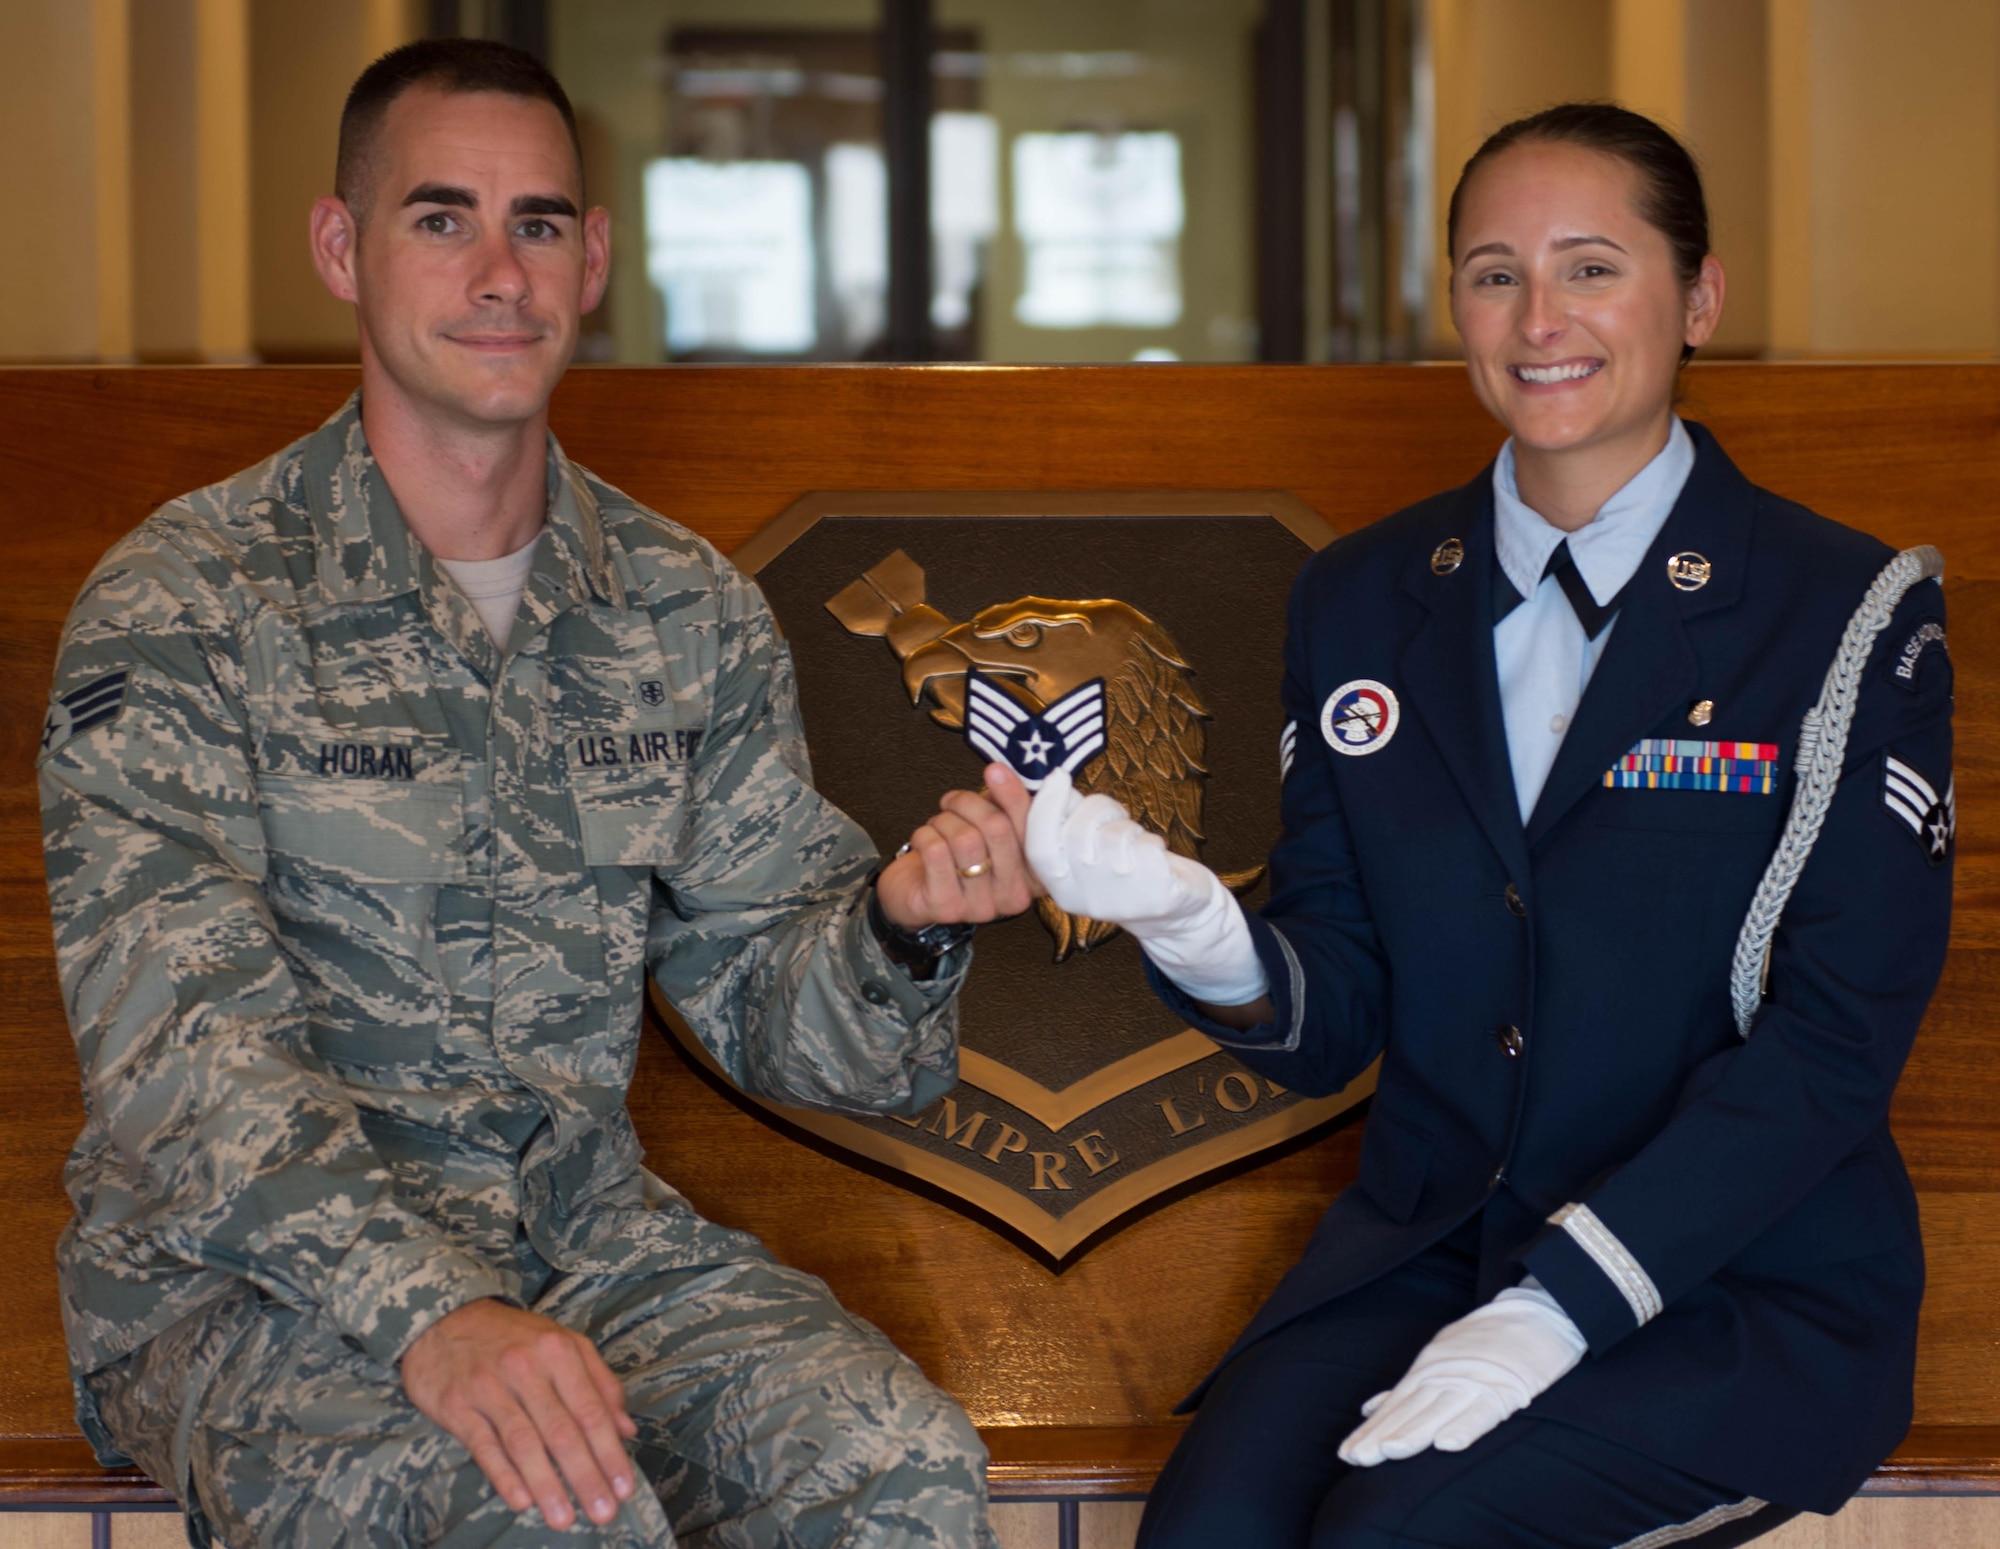 Senior Airmen Joshua and Kelsey Horan, a married couple in the 96th Medical Group, hold up their promotion stripes.